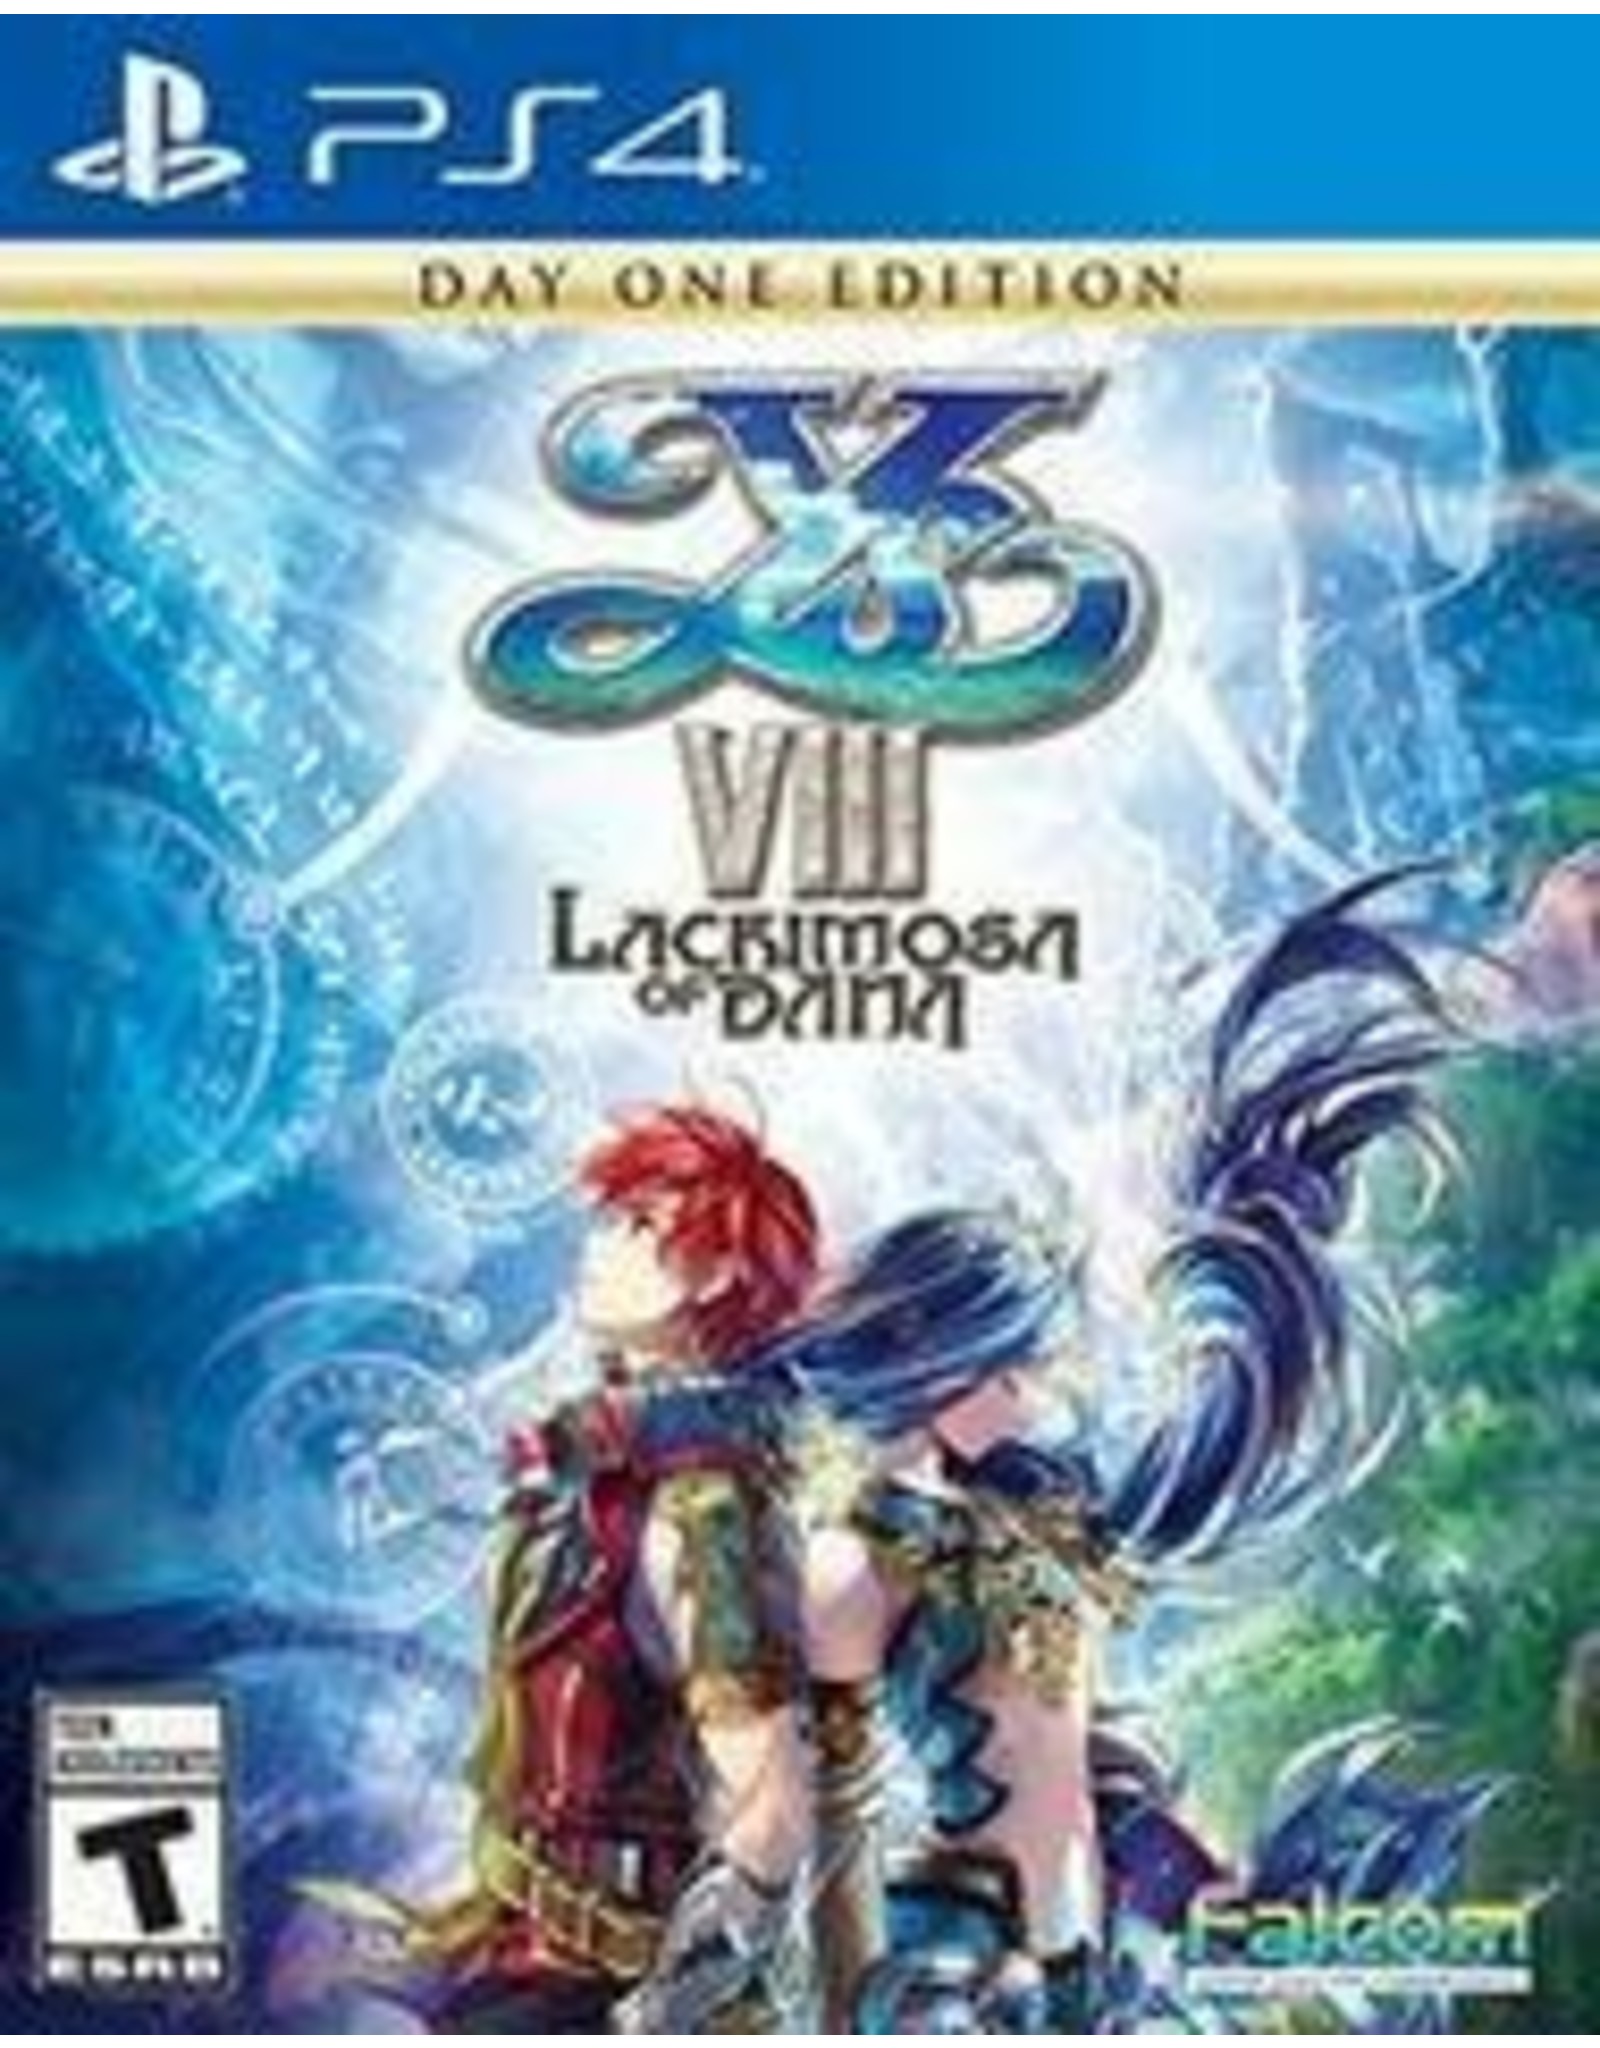 Playstation 4 Ys VIII Lacrimosa of DANA Day One Edition (Used)